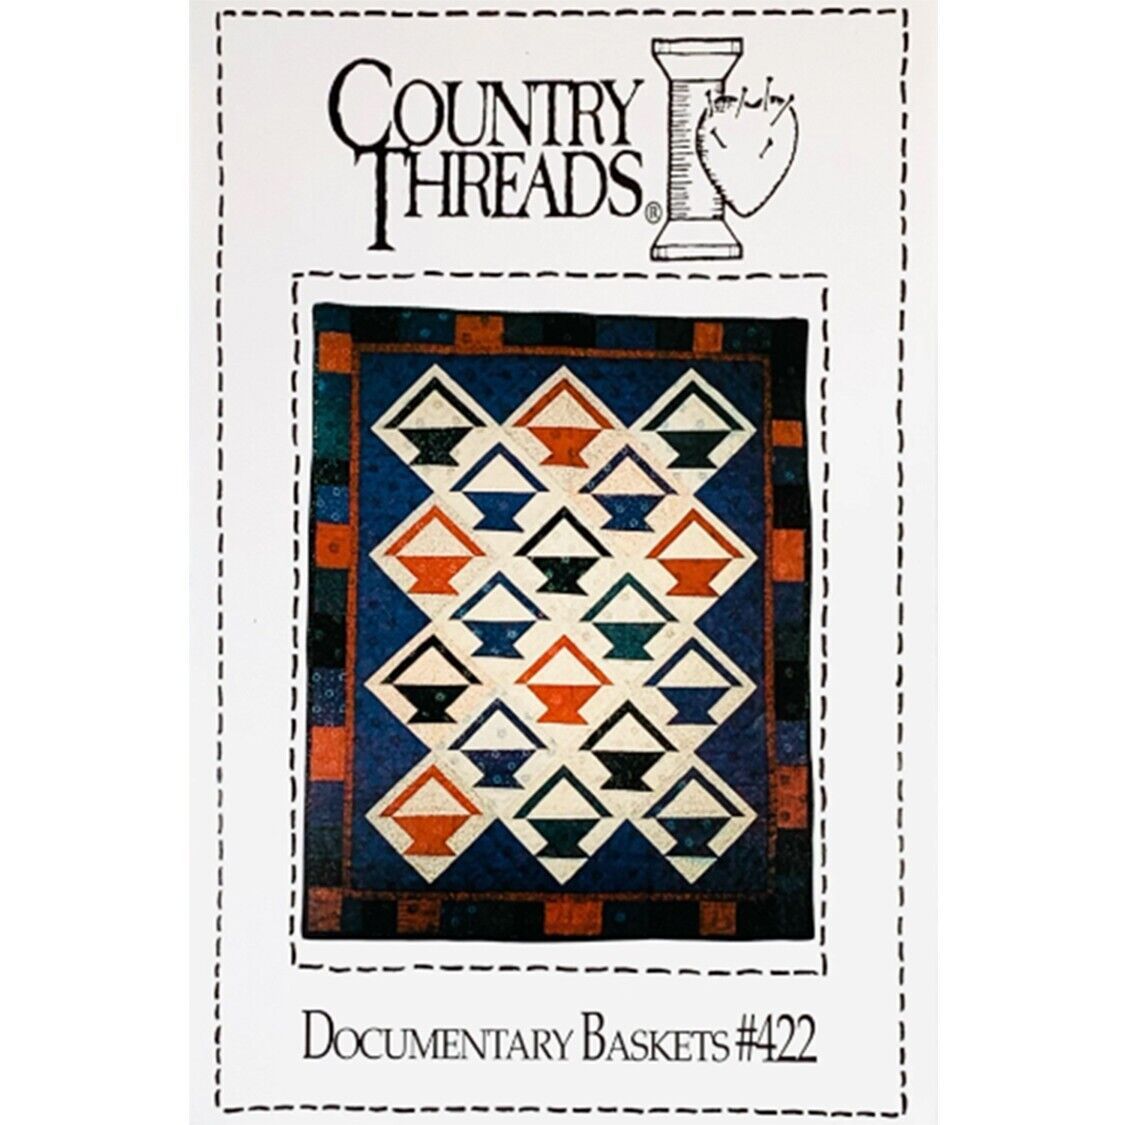 Primary image for Documentary Baskets Quilt PATTERN 422 by Country Threads Basket Quilt Pattern